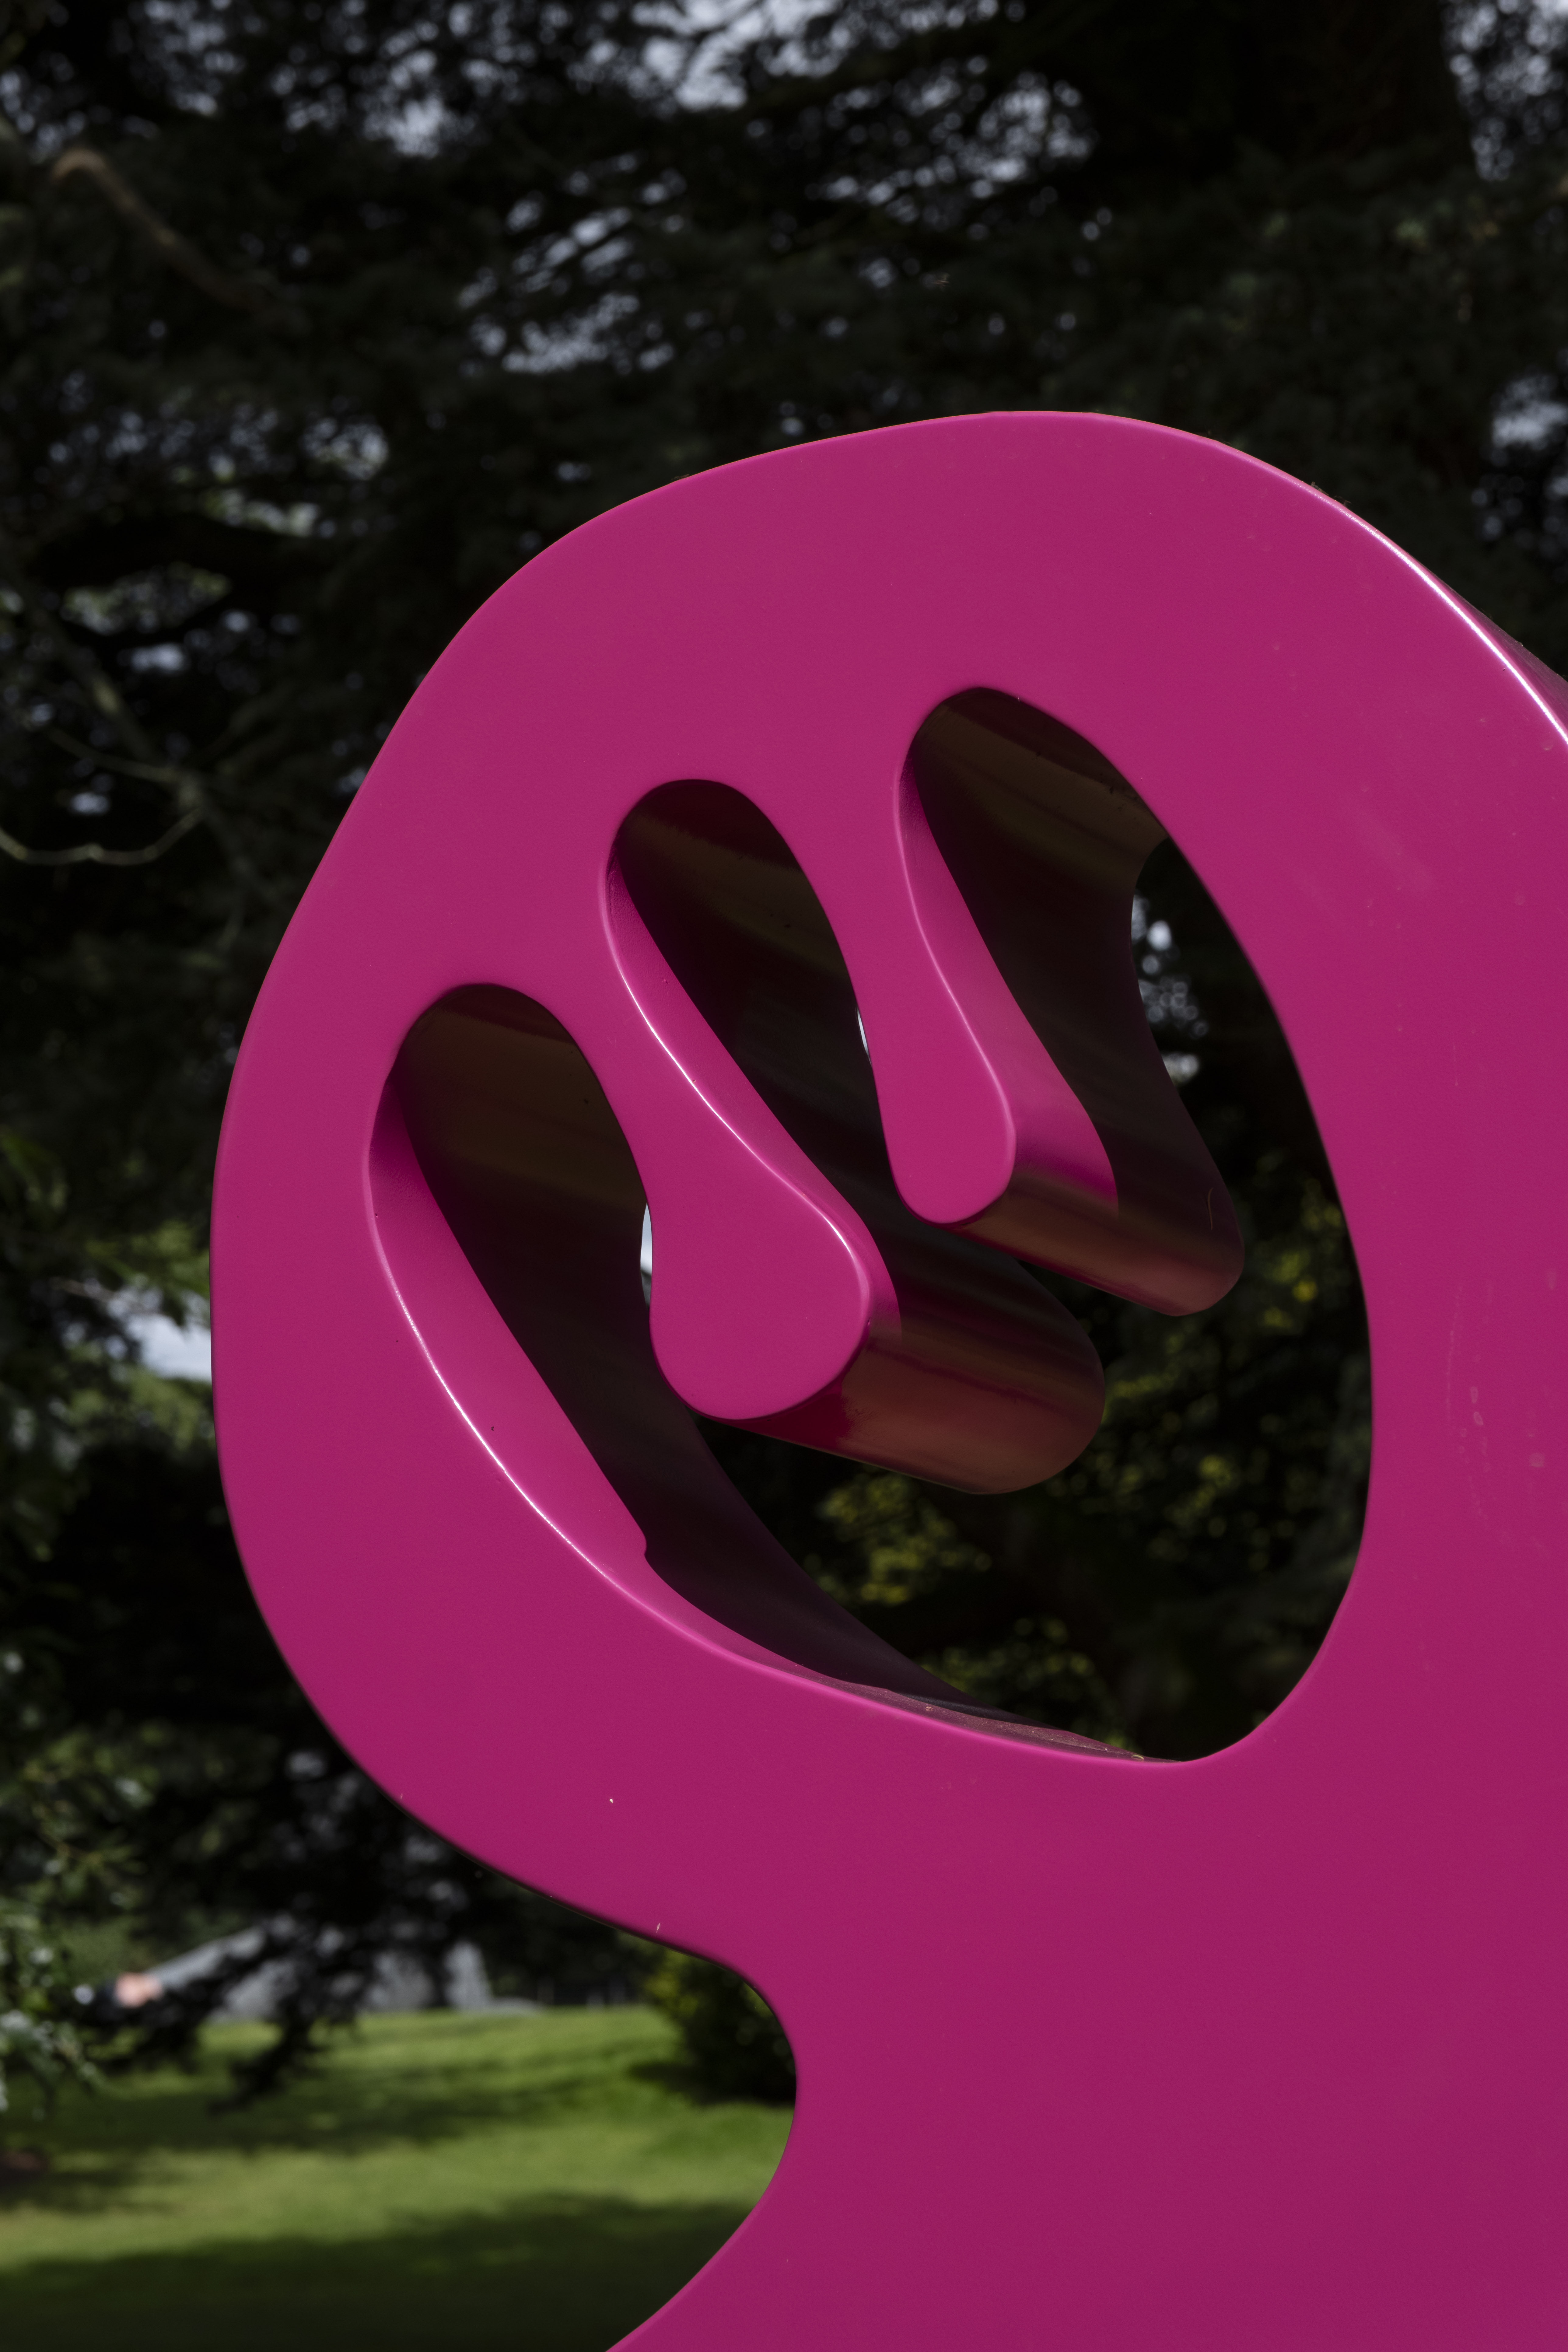 A close up of a bright pink abstract sculpture outdoors